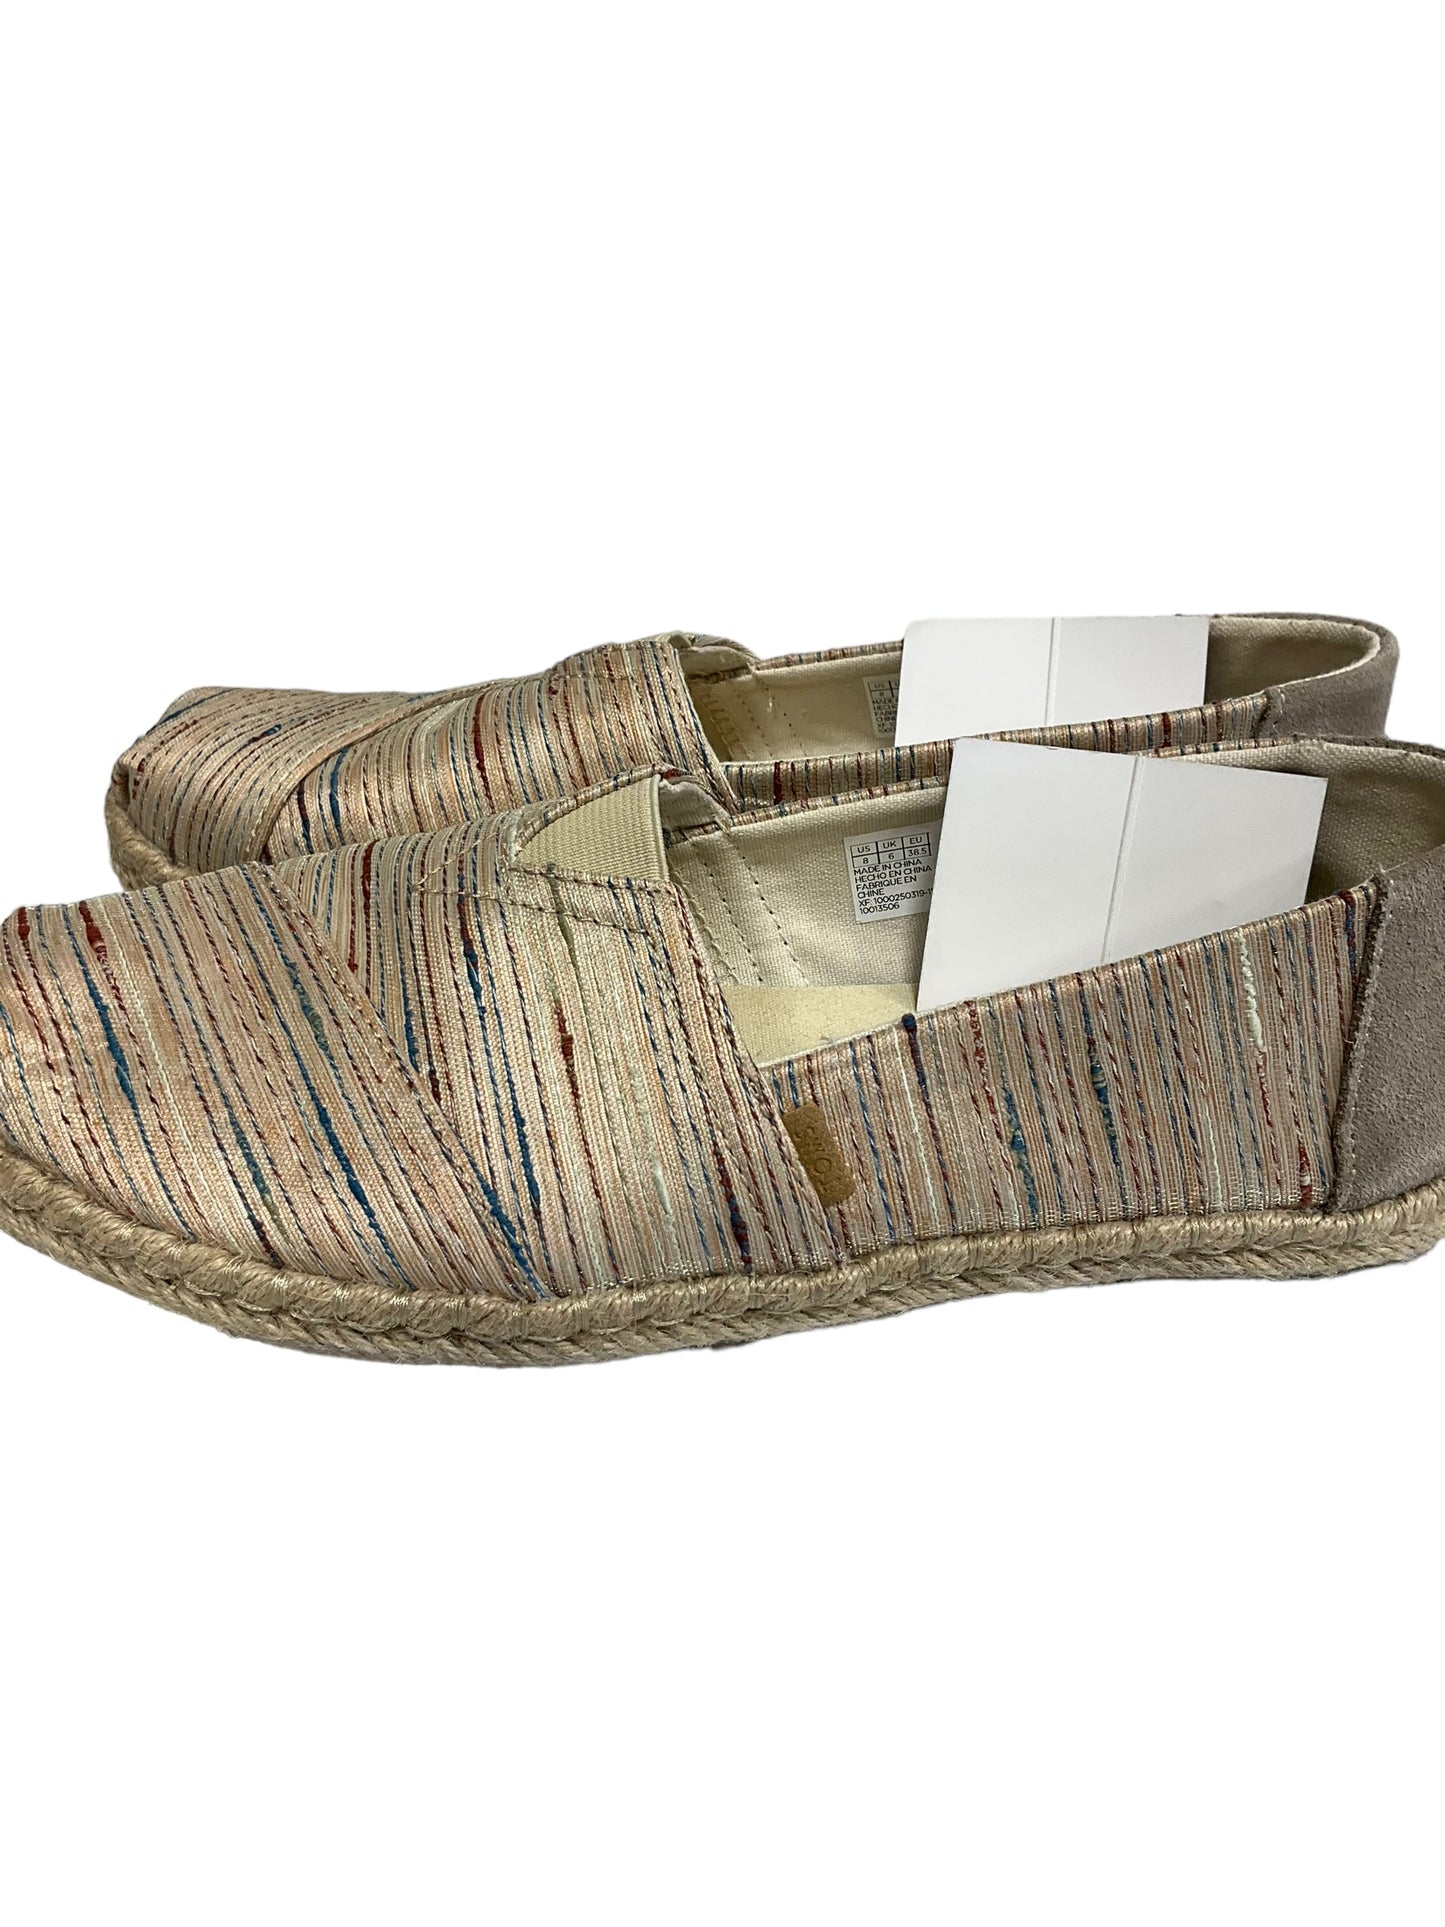 Shoes Flats Boat By Toms  Size: 8